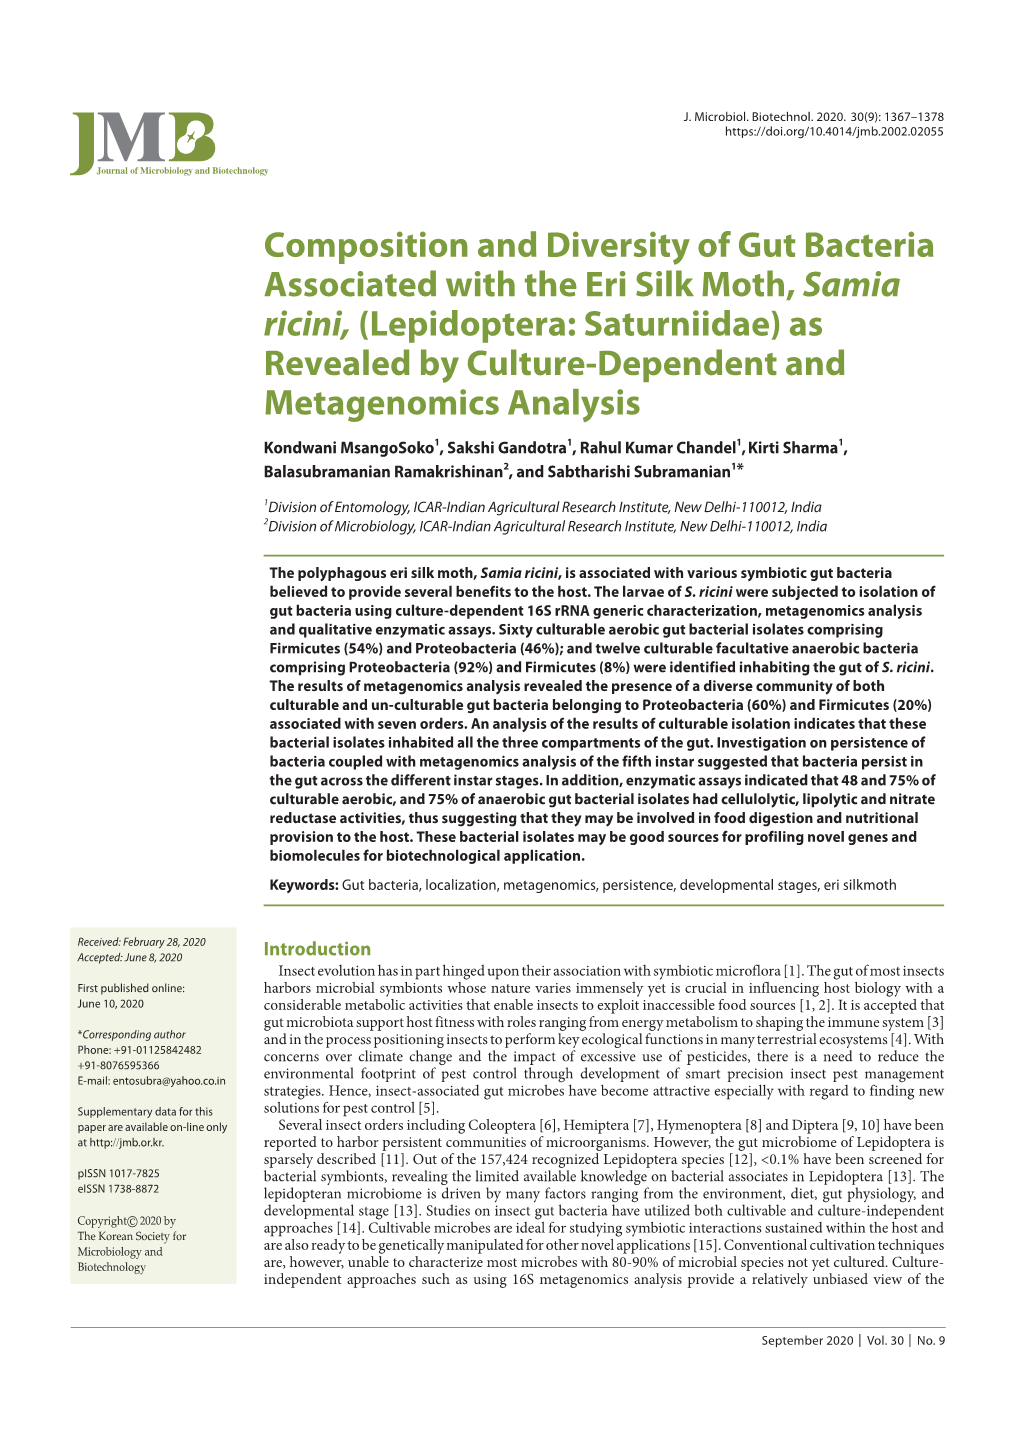 Composition and Diversity of Gut Bacteria Associated with the Eri Silk